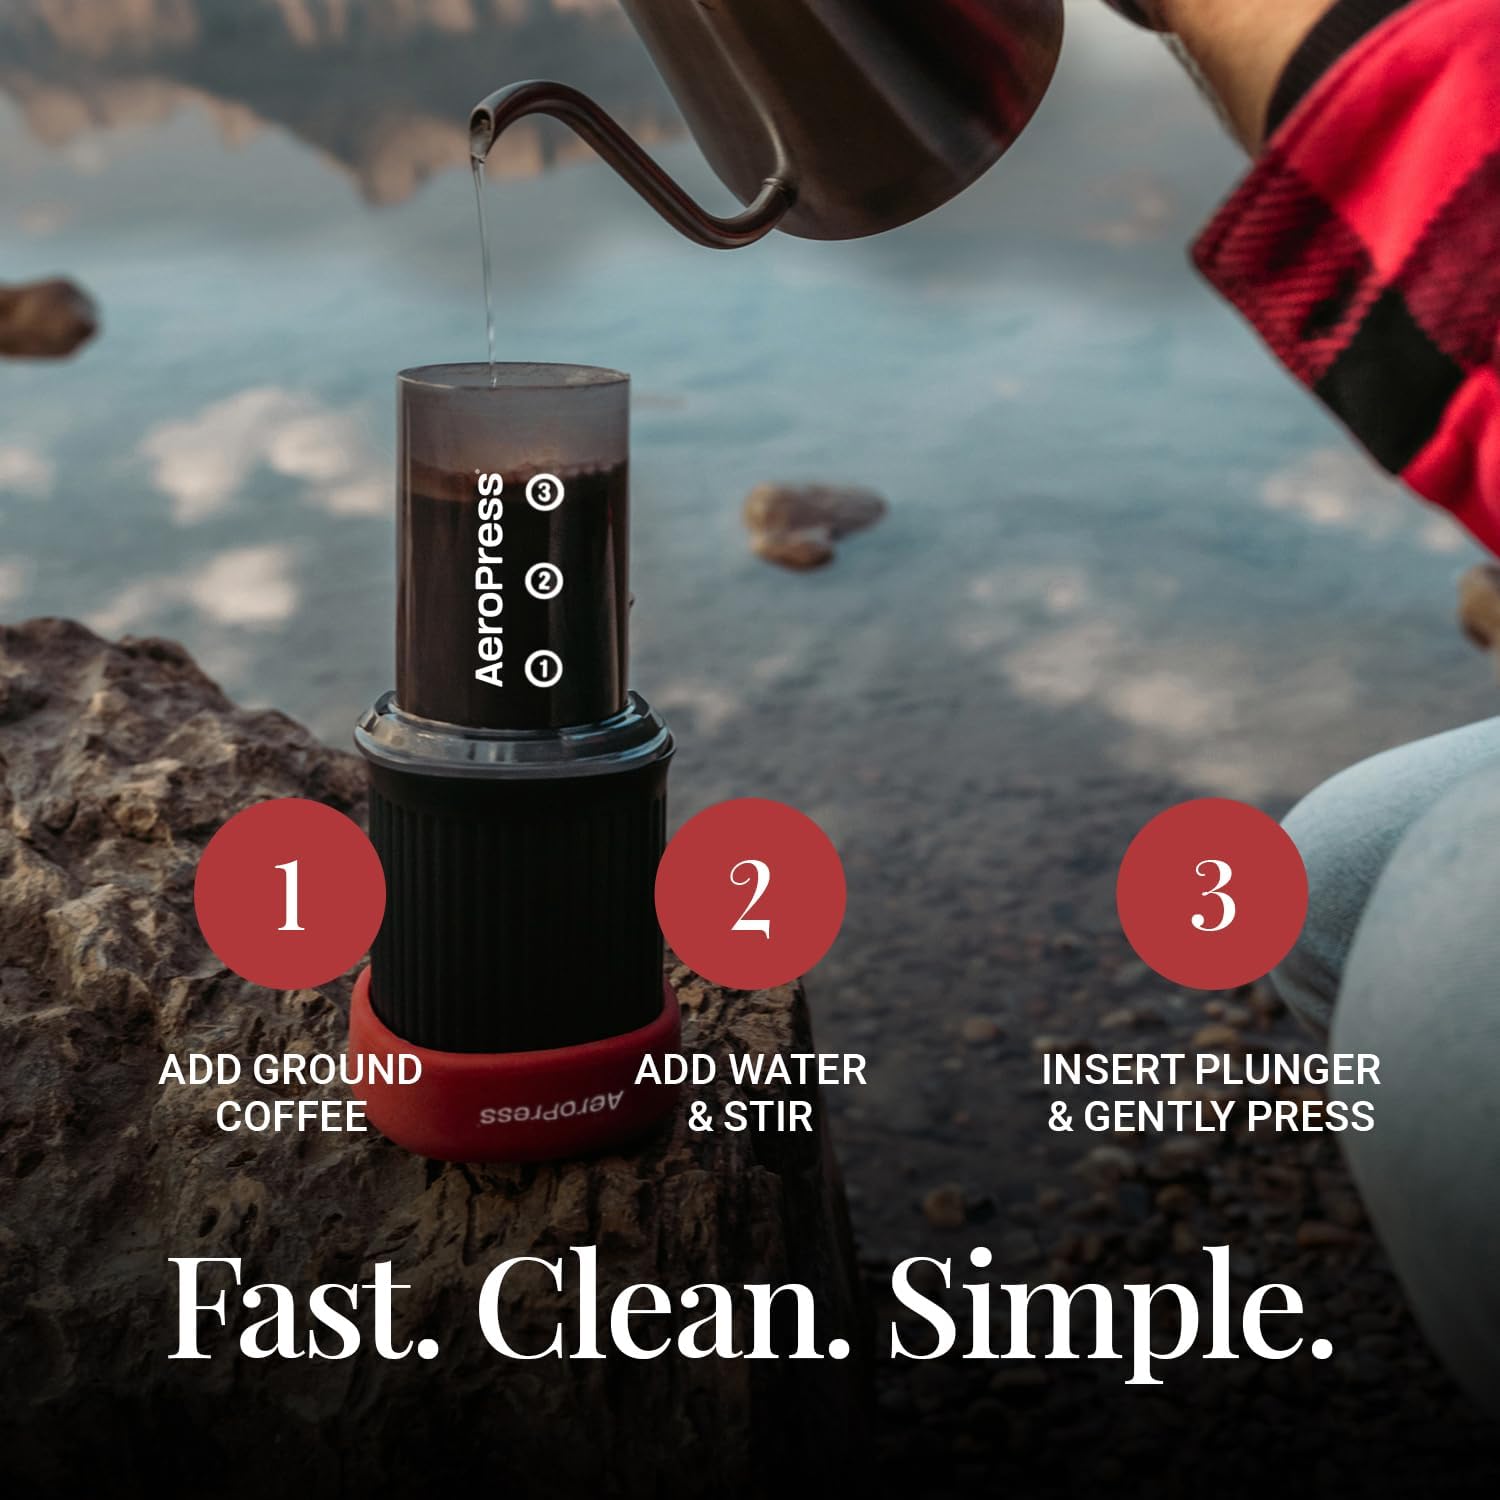 Aeropress Go Travel Coffee Press Kit - 3 in 1 brew method combines French Press, Pourover, Espresso - without grit or bitterness - Small portable Full bodied coffee maker for camping  travel